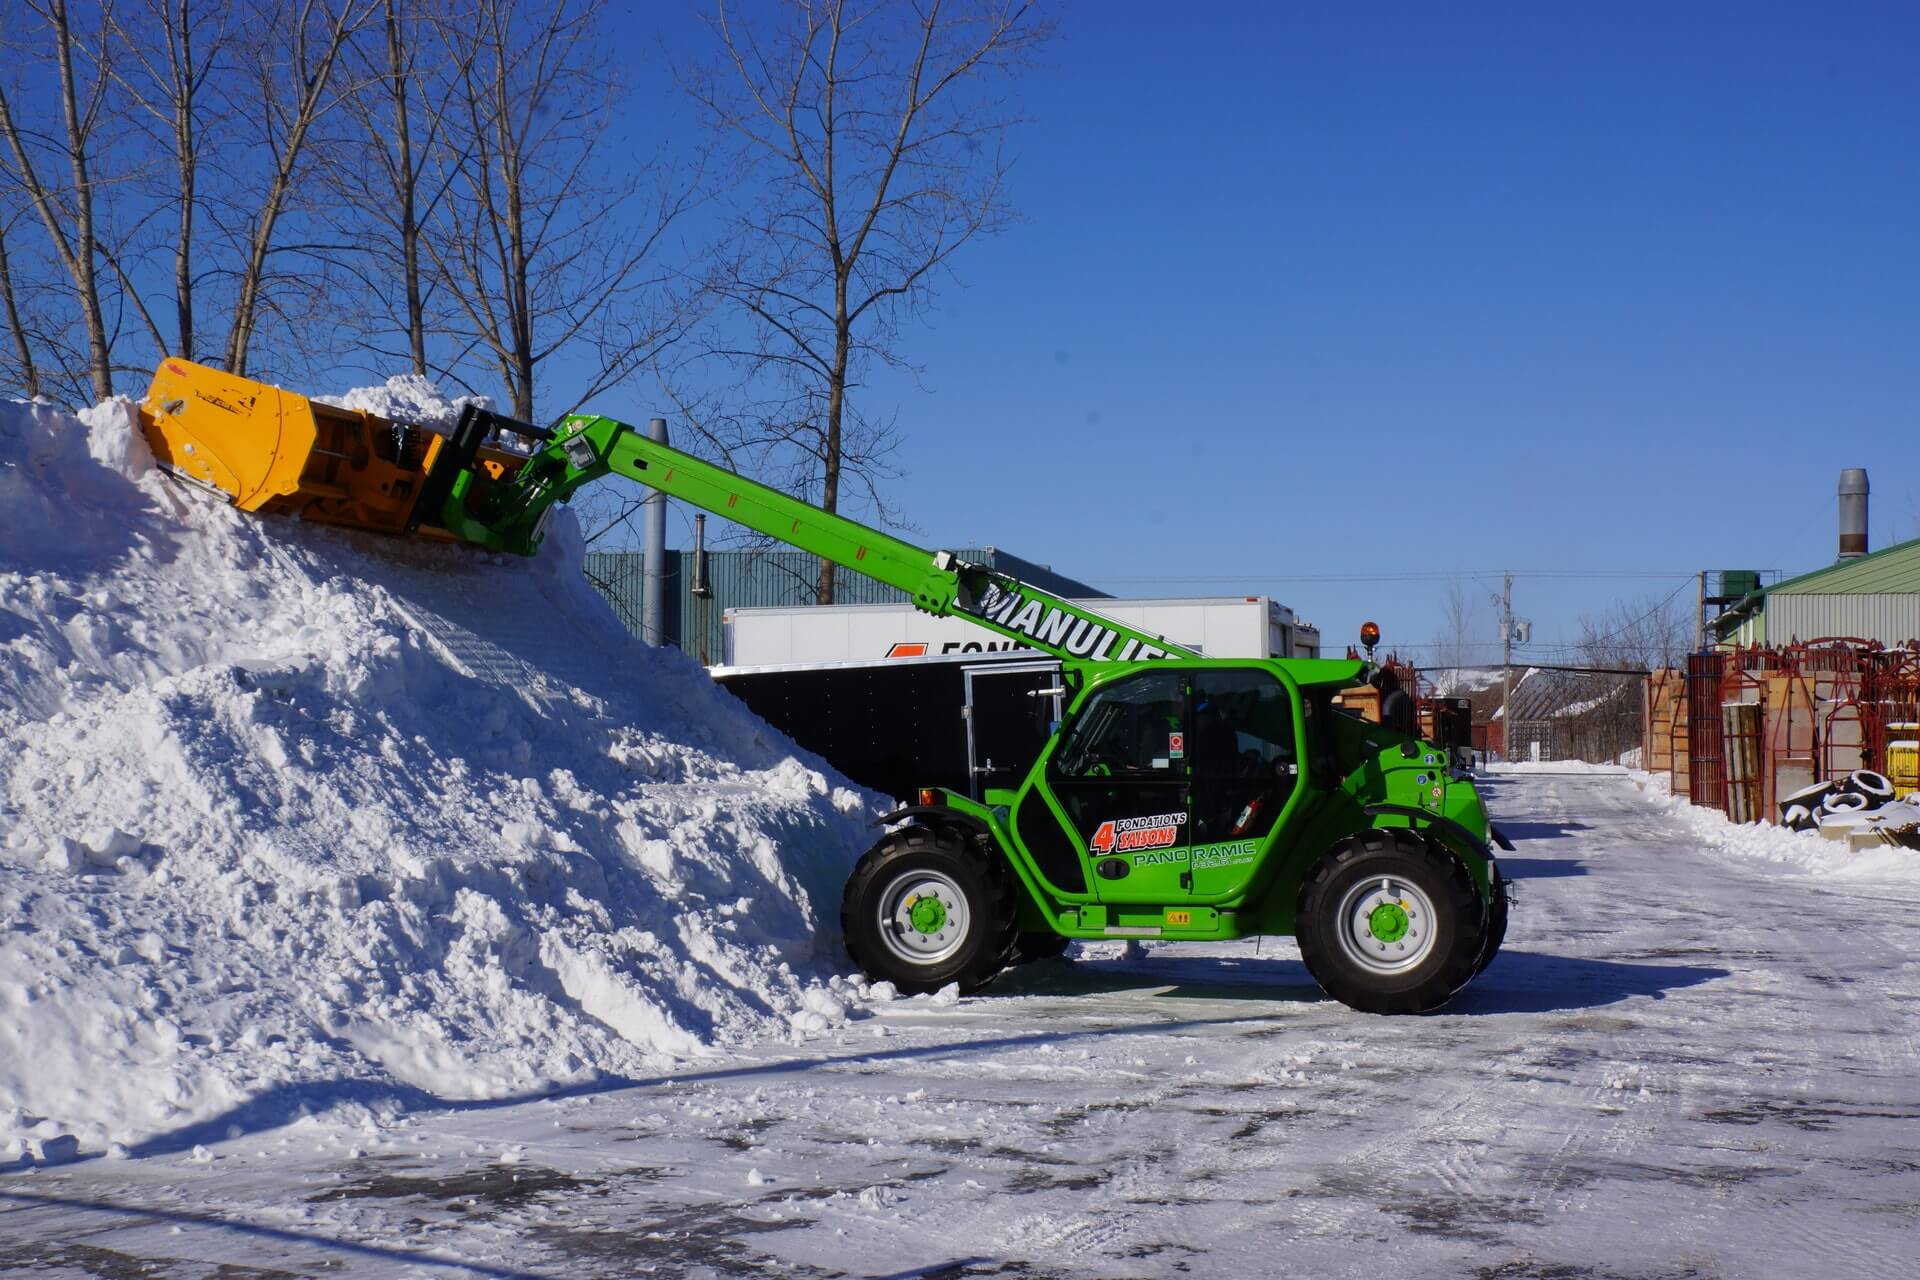 Phtograph showing telescopic snow removal with with telescopic reach